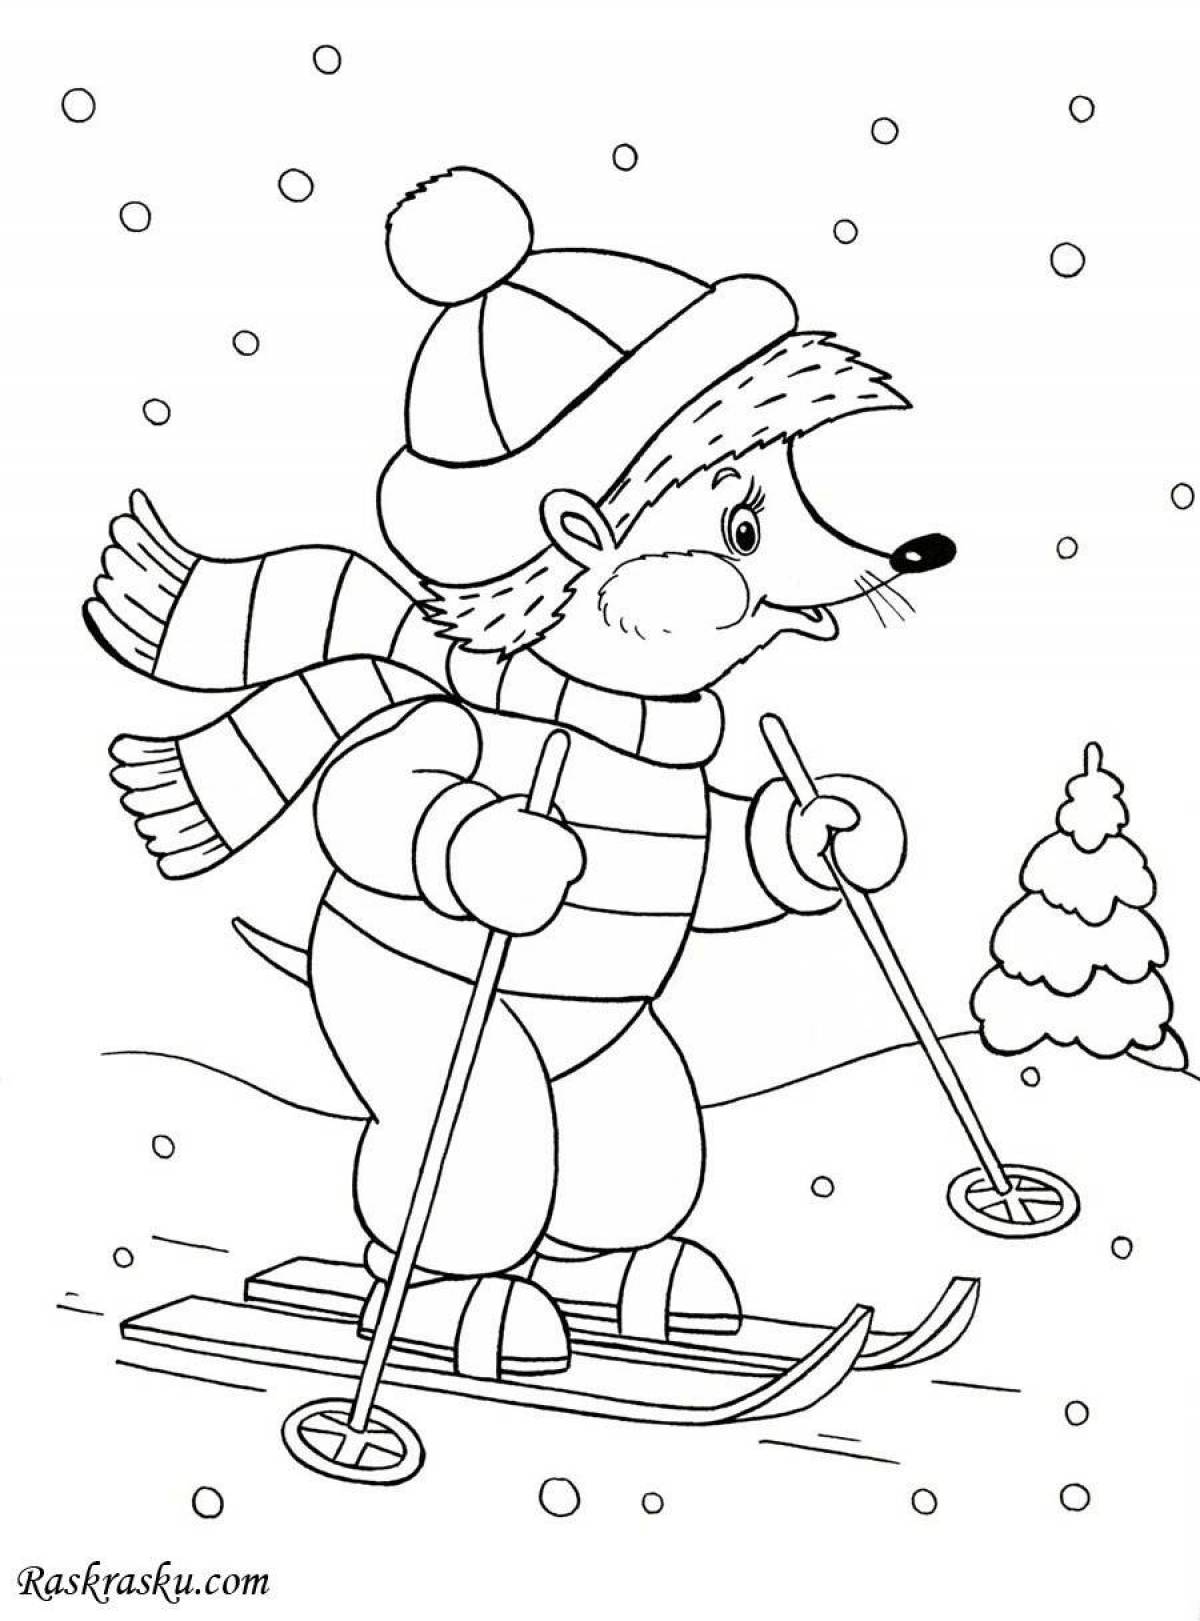 Delightful winter coloring book for 4-5 year olds